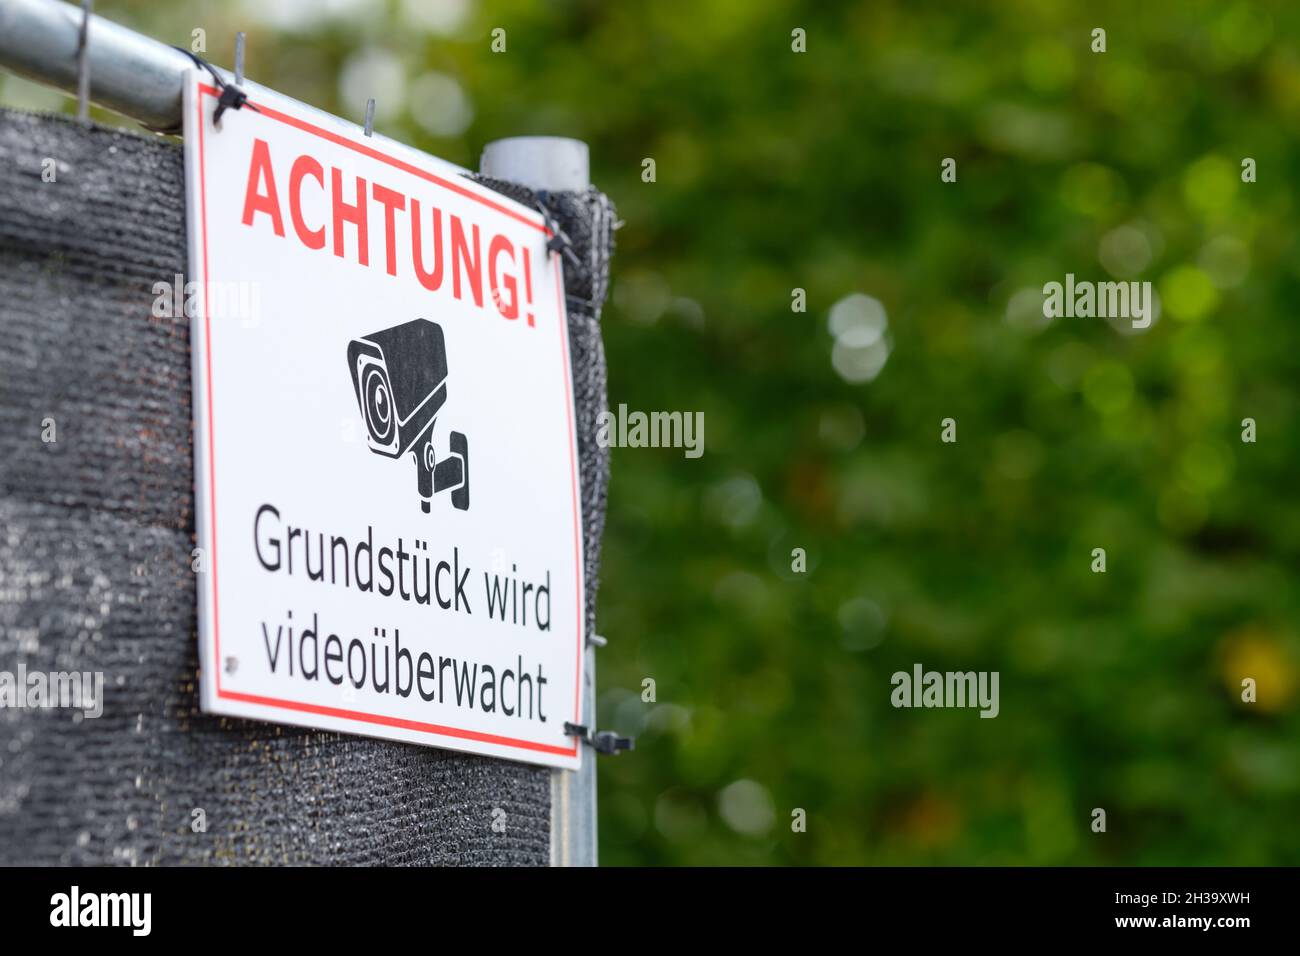 Nuremberg, Germany - October 07, 2021: Close-up of sign at fence of a construction site telling pedestrians Achtung! Grundstück wird videoüberwacht ( Stock Photo